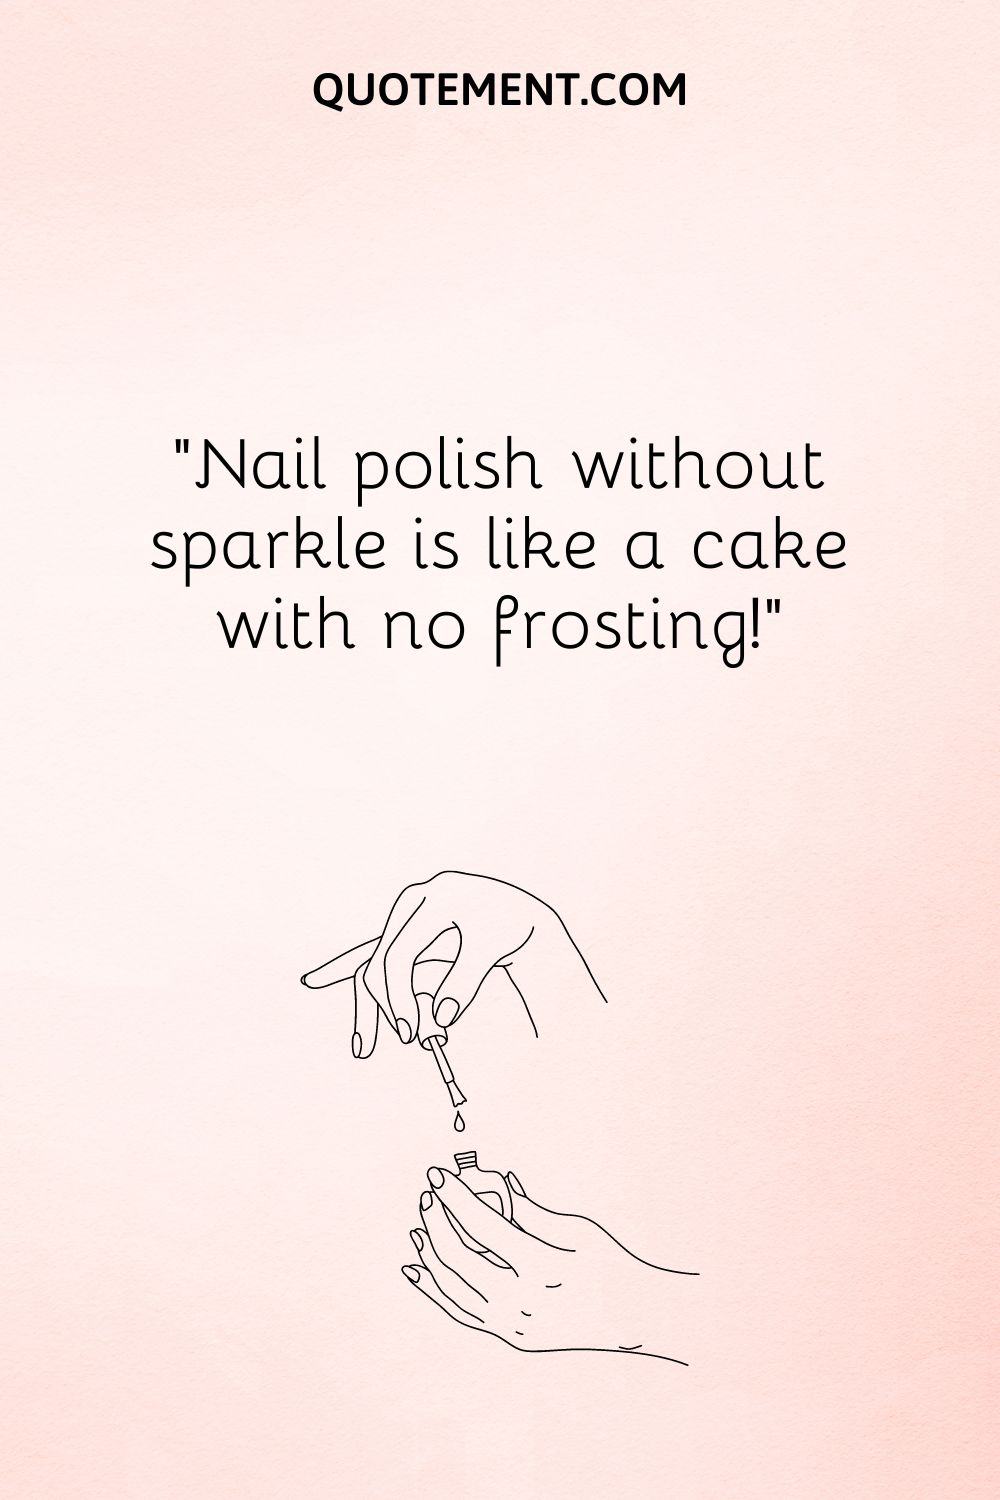 Nail polish without sparkle is like a cake with no frosting